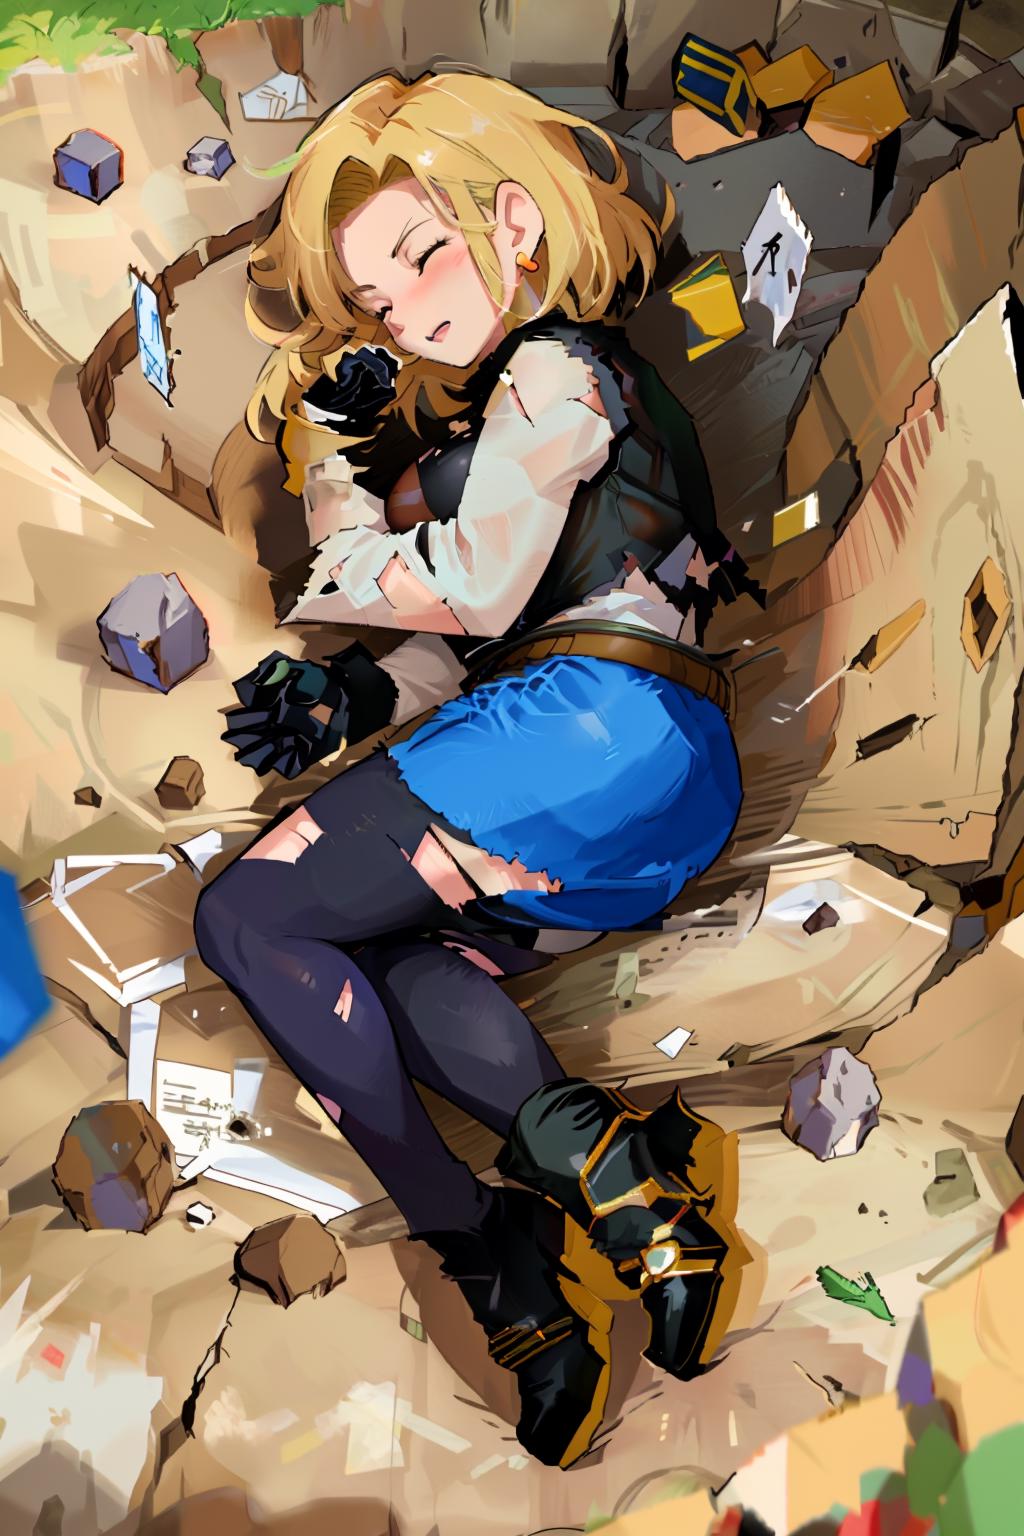 A cartoon woman lying on the ground with a blue dress and black boots.